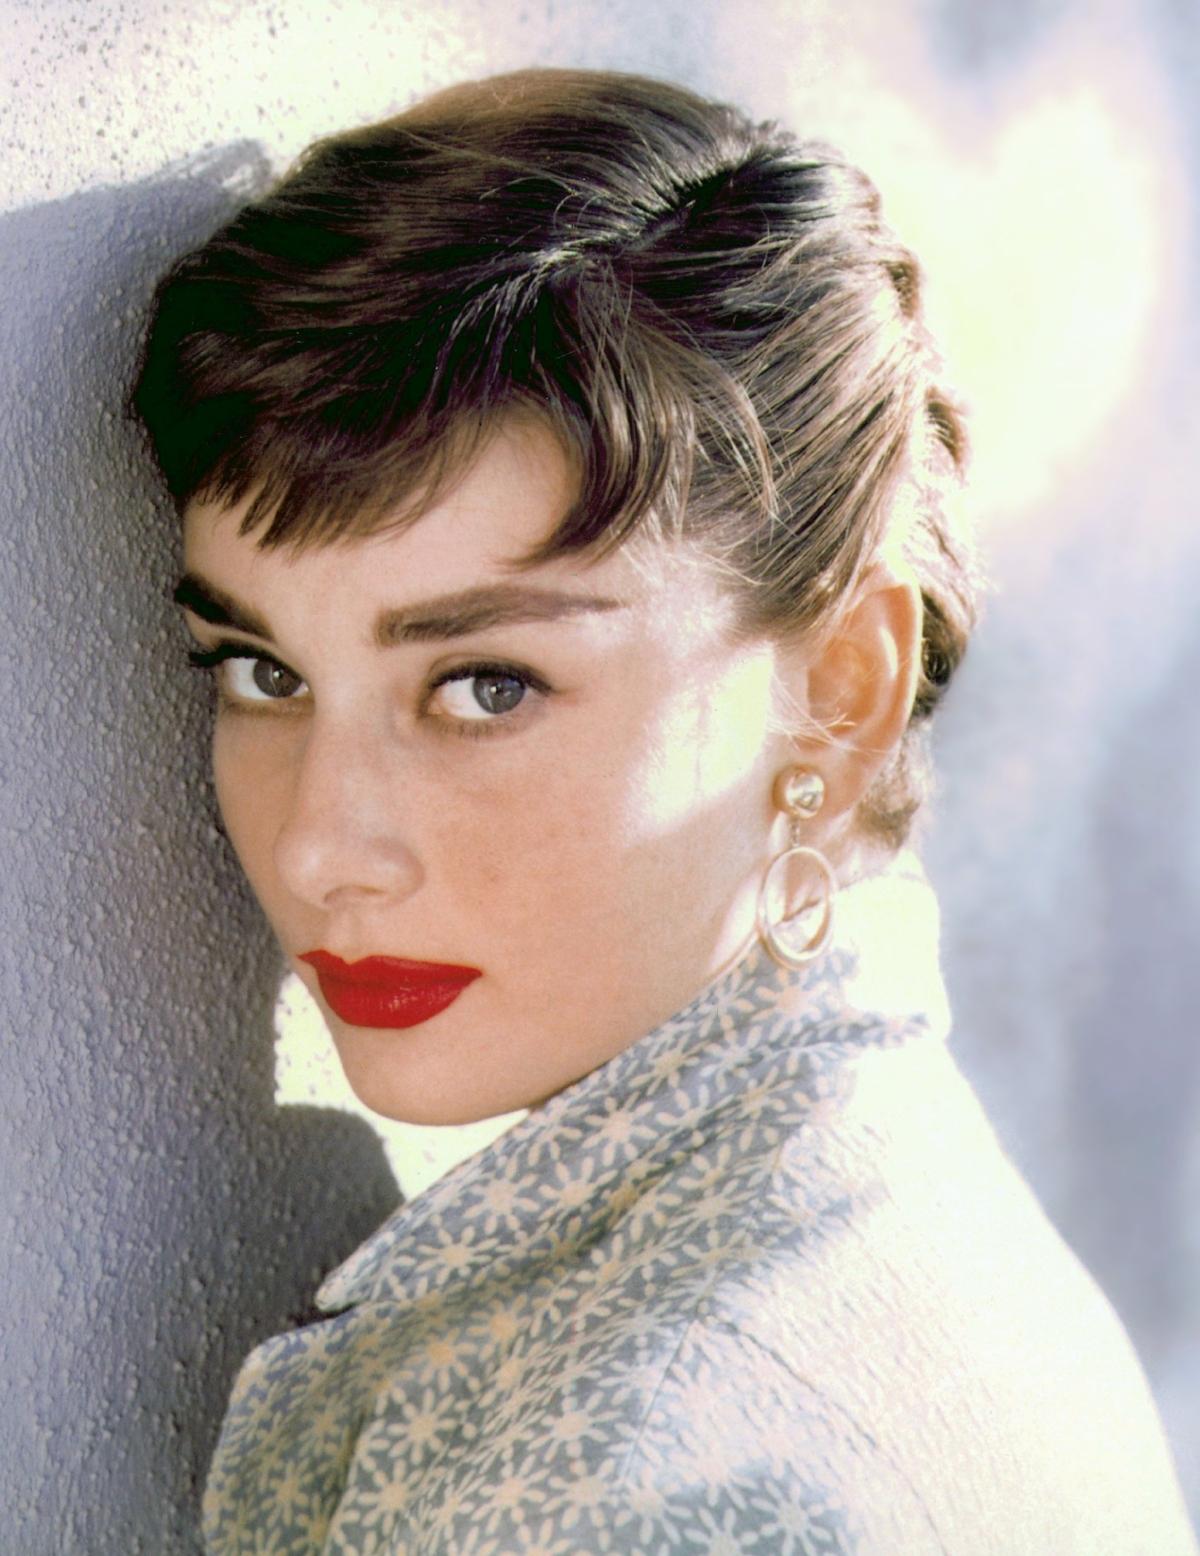  Old Hollywood stars, like Audrey Hepburn, were masters of the classic red lip. (The Hollywood Archive)